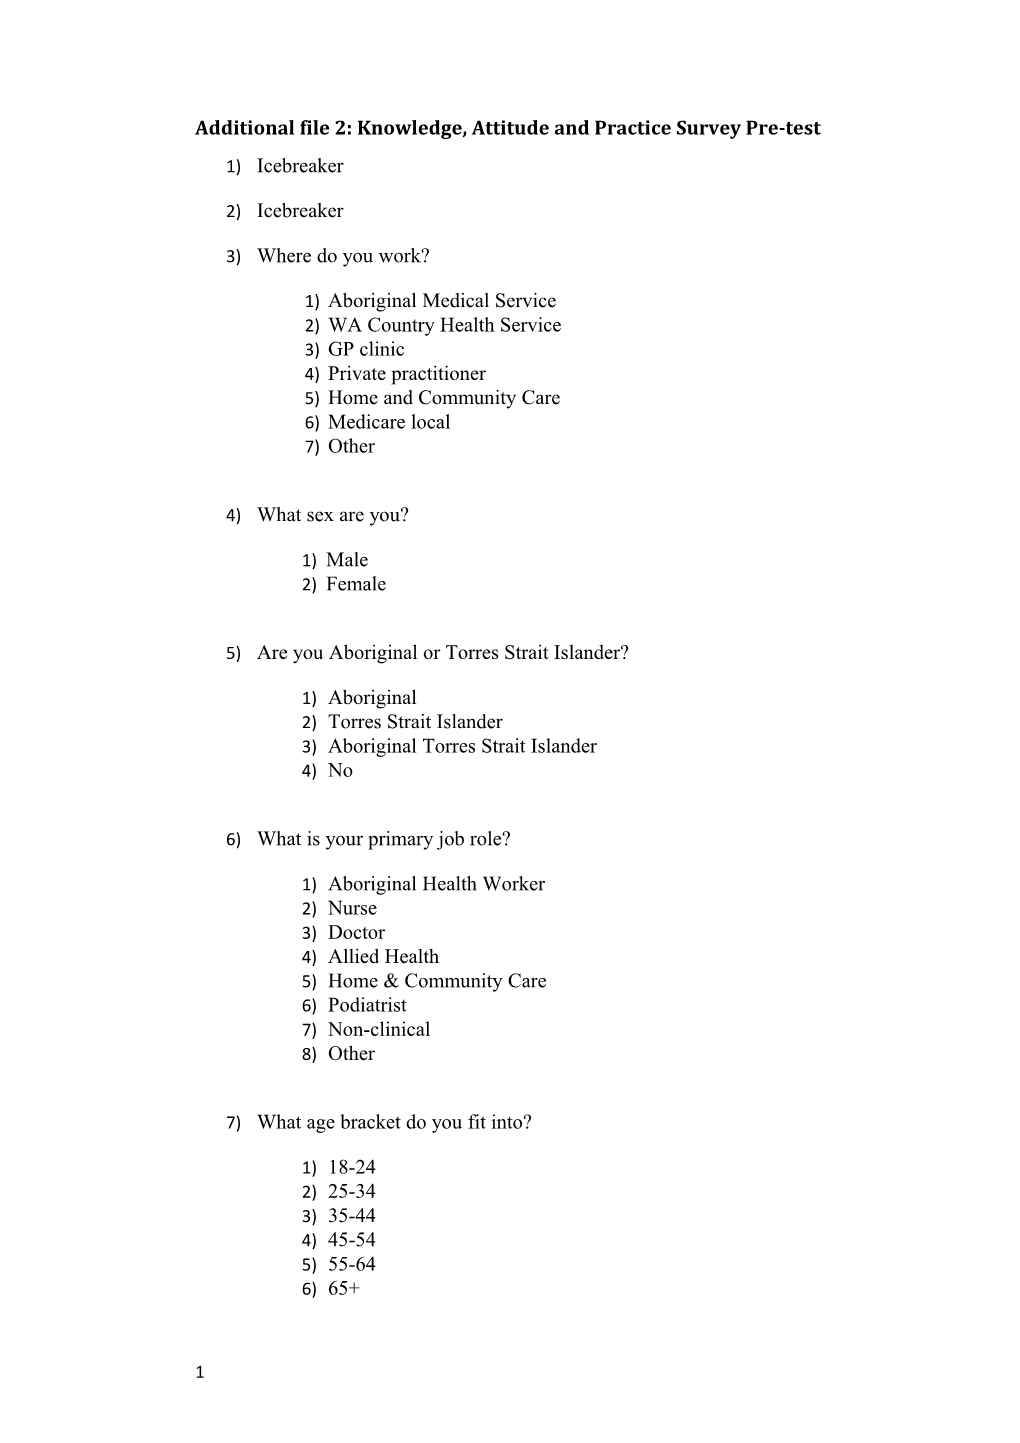 Additional File 2: Knowledge, Attitude and Practice Survey Pre-Test